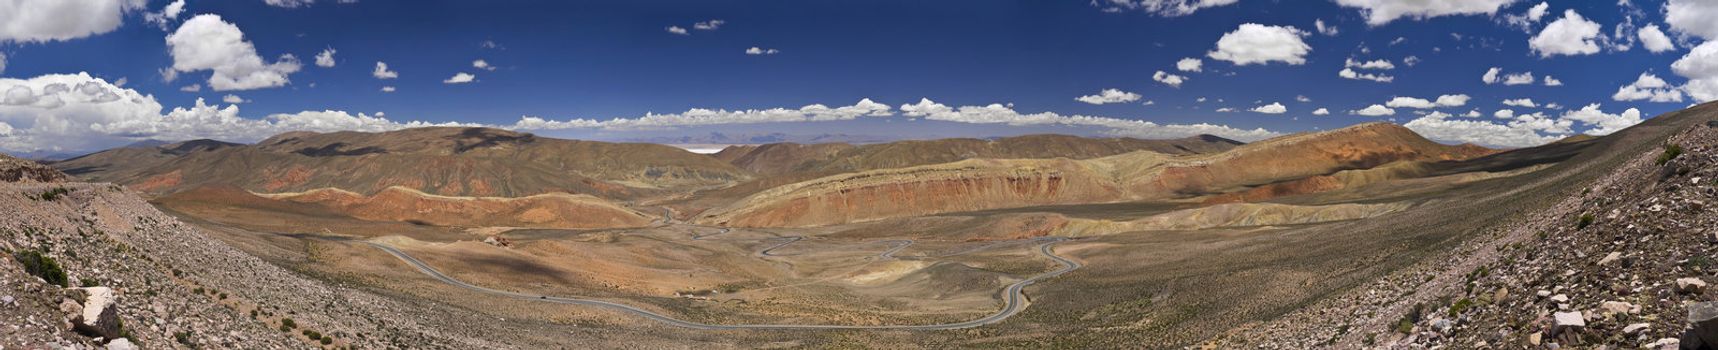 Wide panorama of a rocky desert taken on the northwest region of Argentina. You can see the salt lake far behind the mountains.